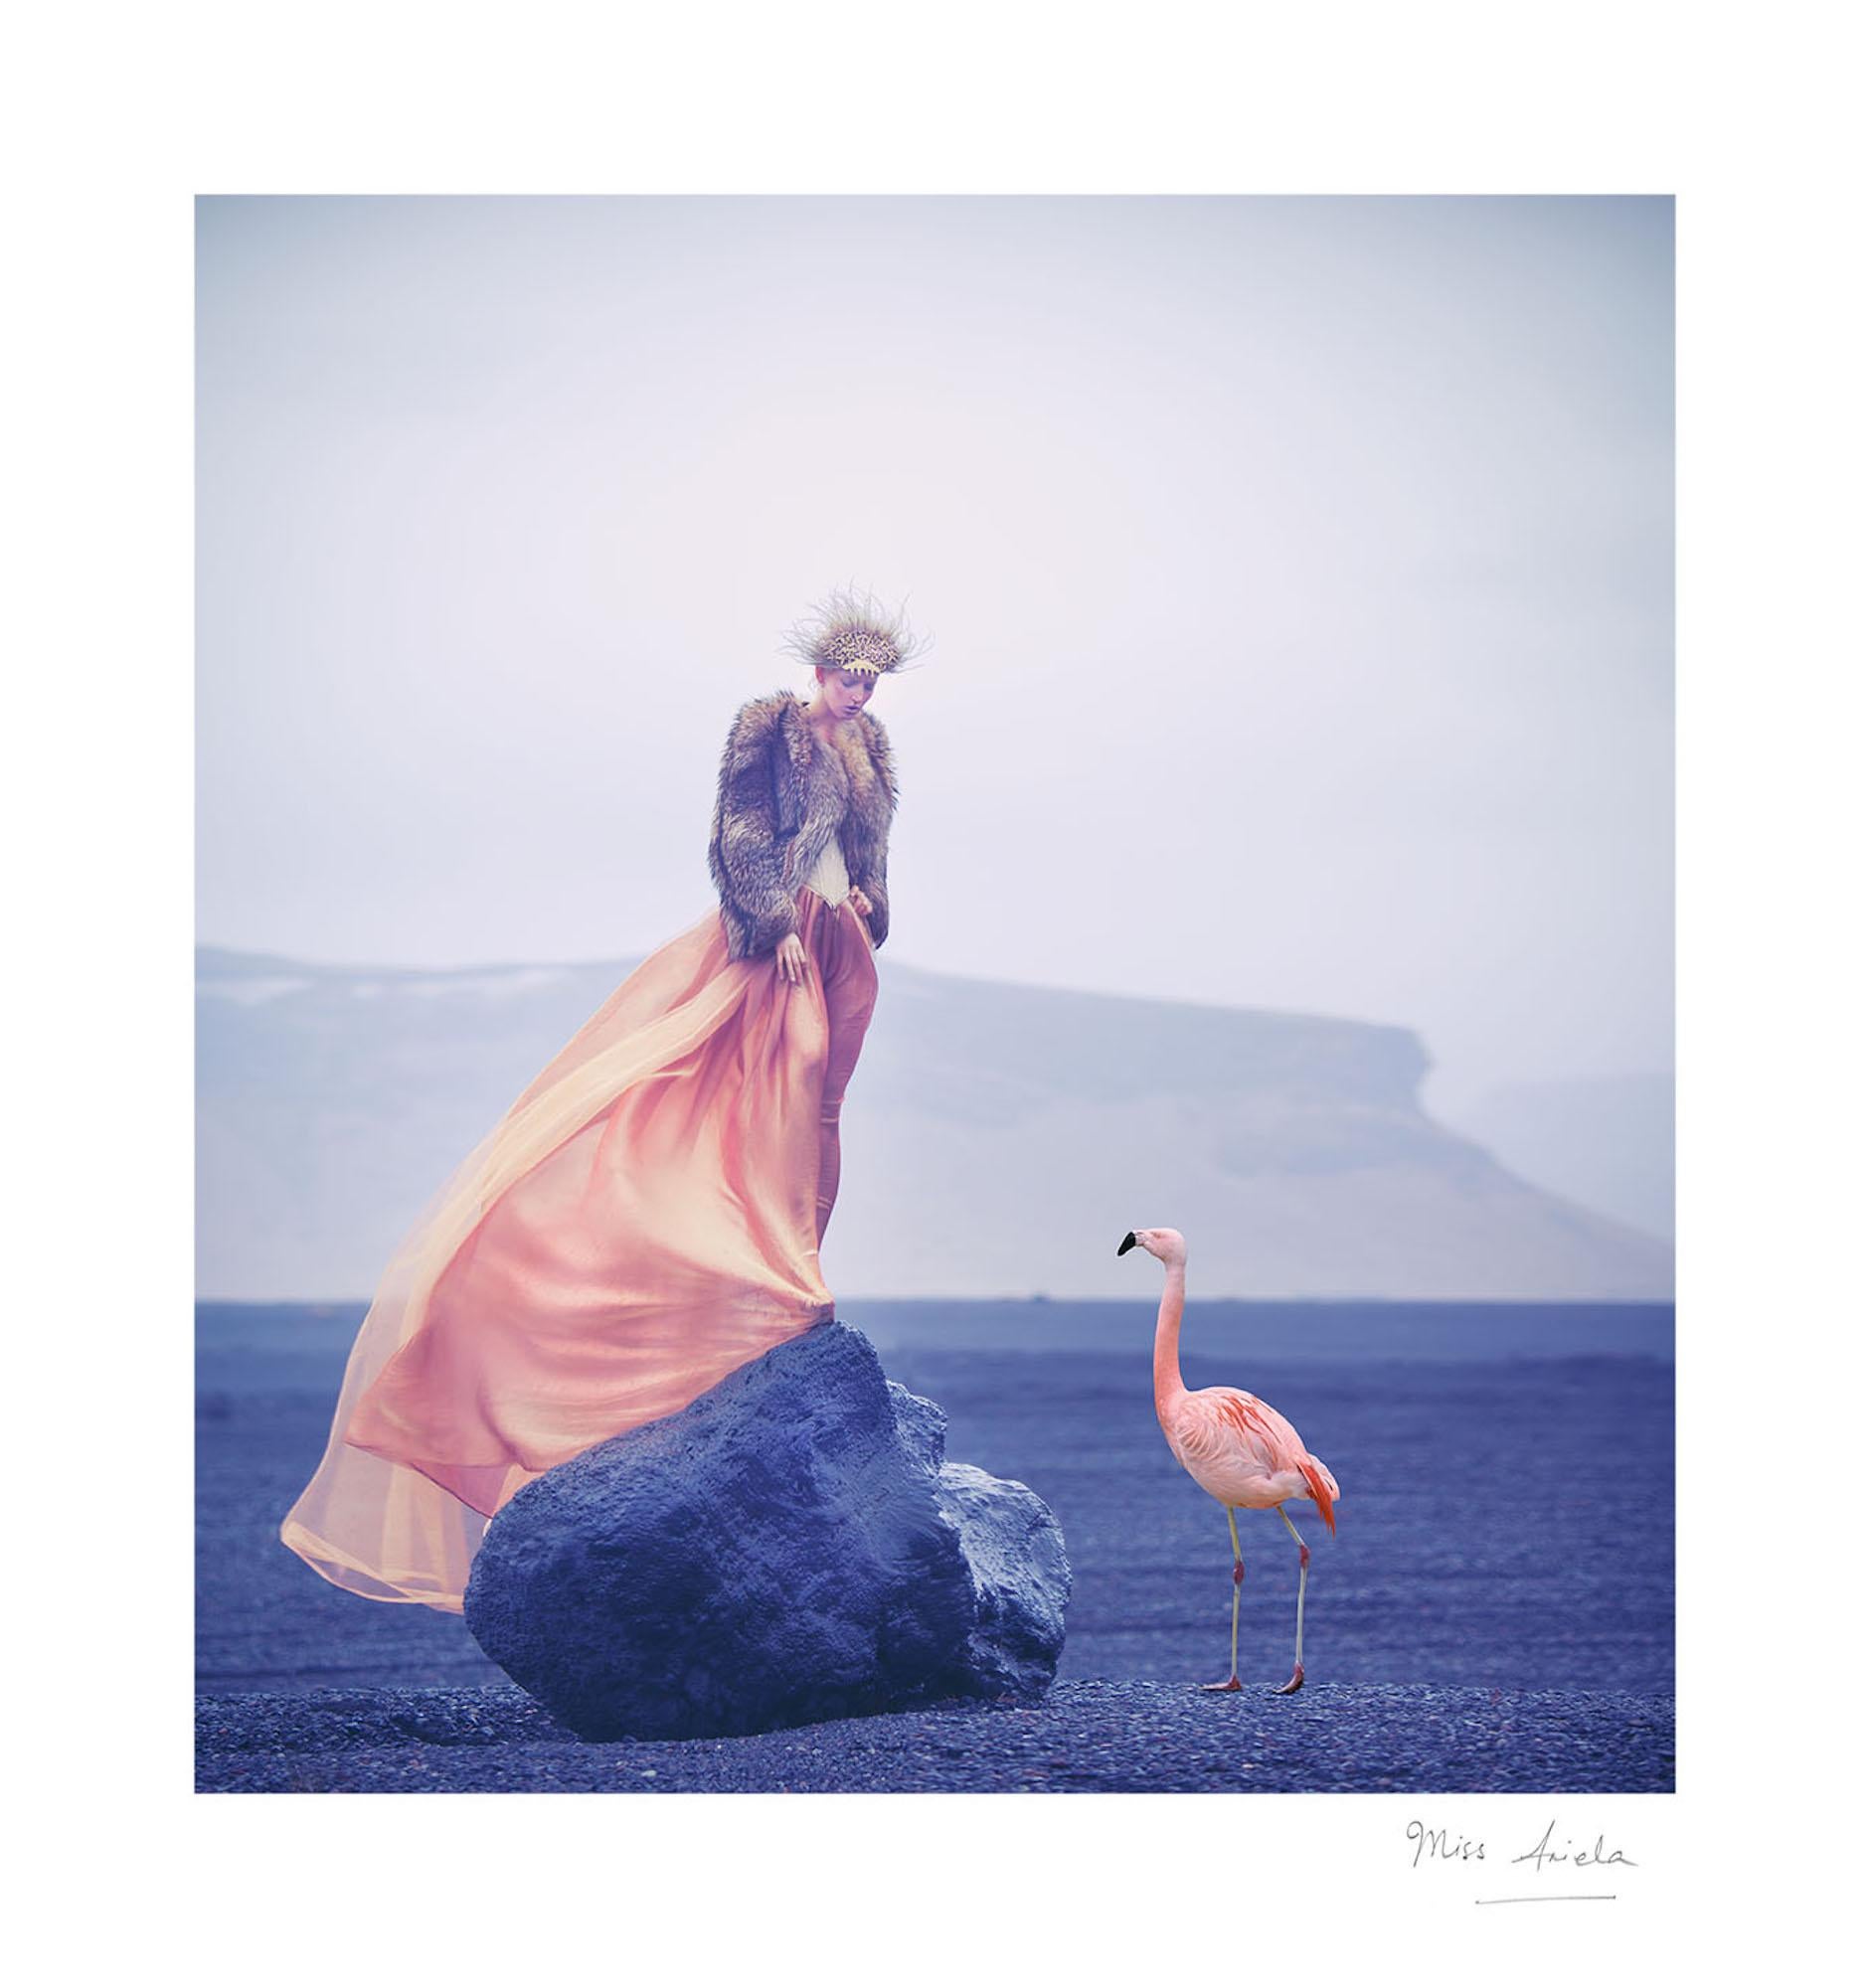 Silent Shore is a work by contemporary photographer Miss Aniela.

This photograph is sold unframed as a print only. It is available in 5 dimensions:
*41 cm × 38 cm (16.1